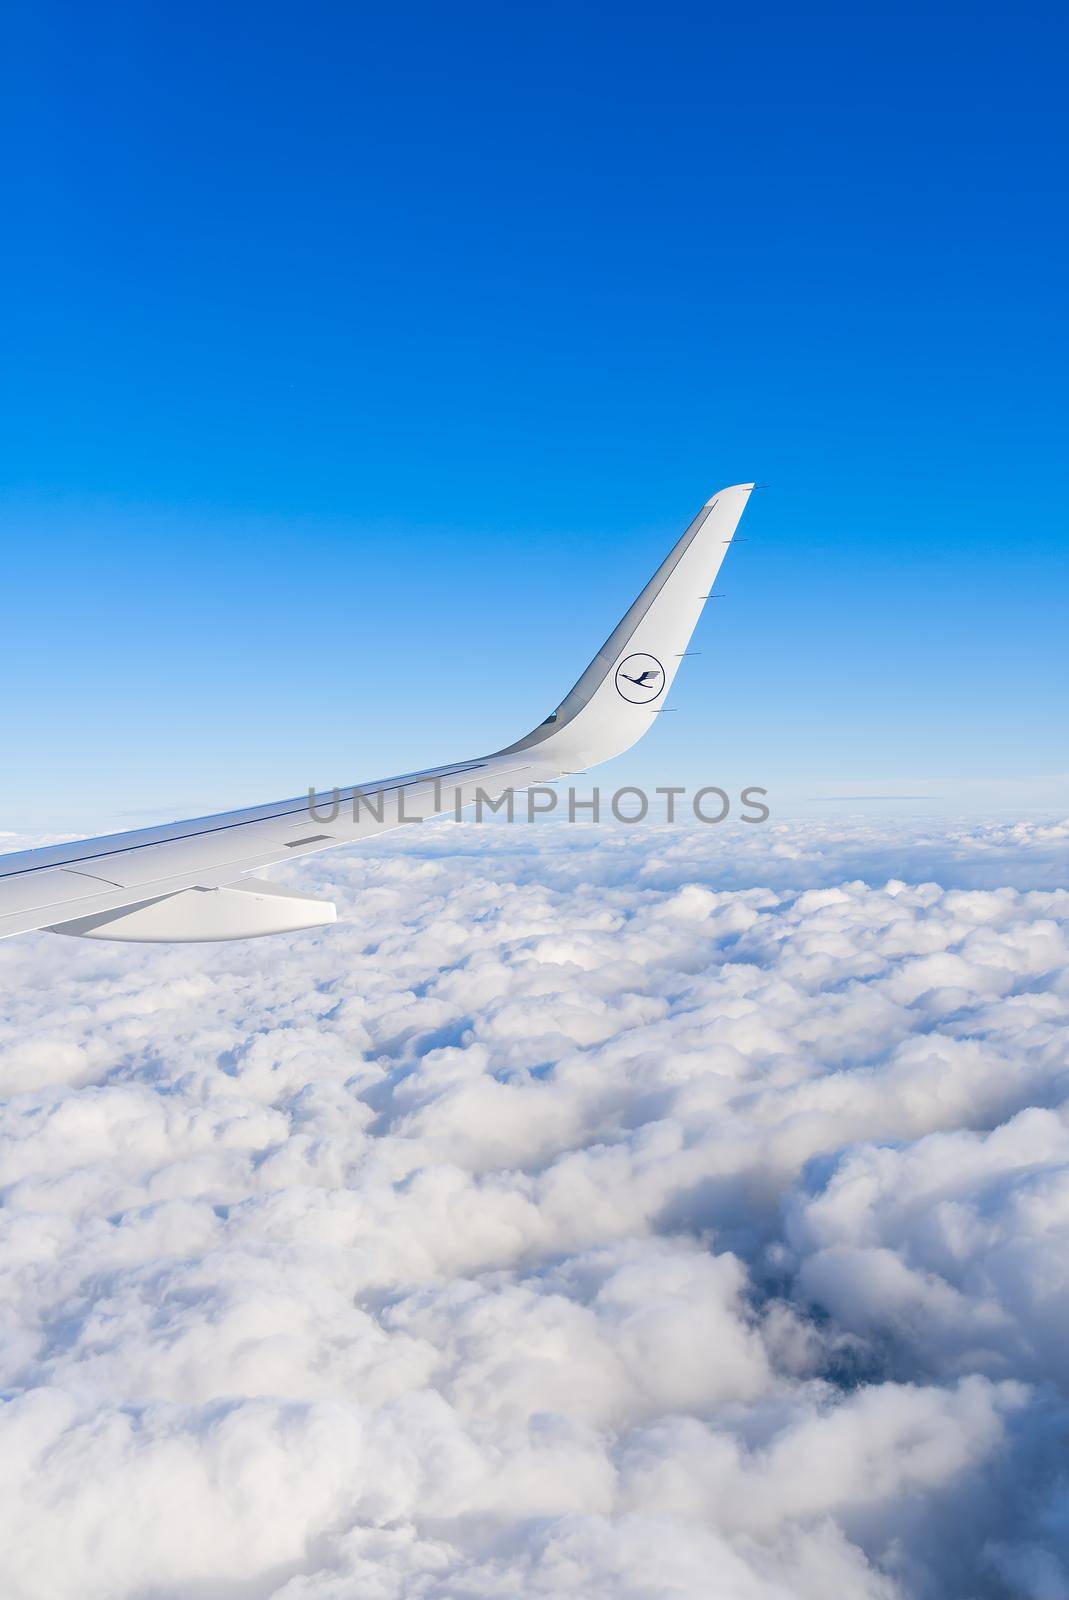 22.05.2021 Frankfurt, Germany: The Airbus A321 wing with Lufthansa airline logo and blue sky over clouds background. by PhotoTime